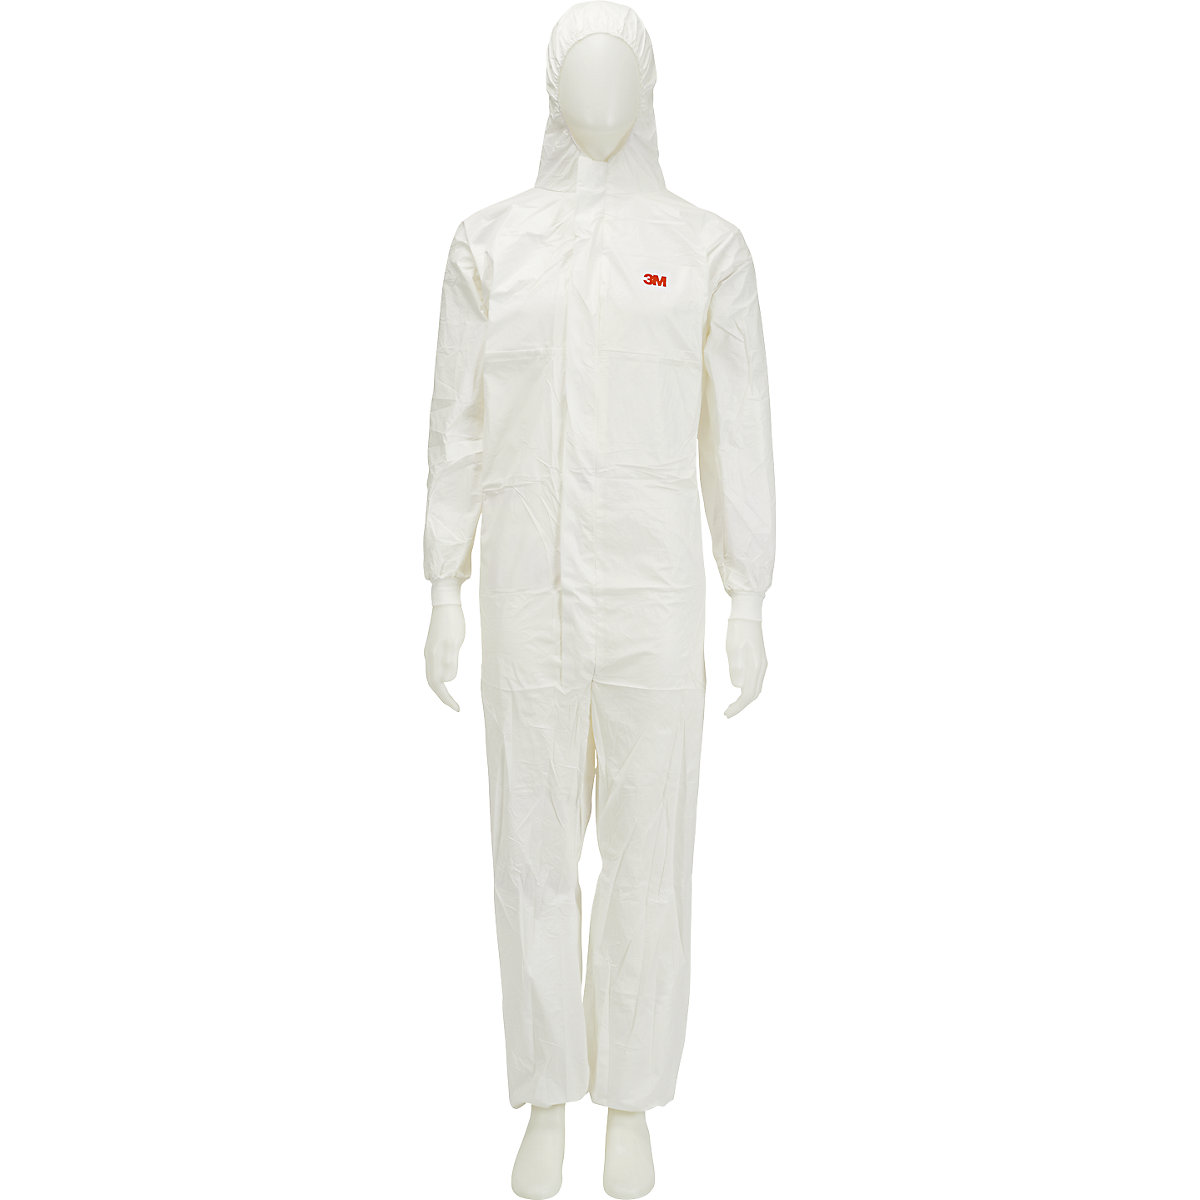 Disposable protective suit 4545 (Type 5/6) – 3M